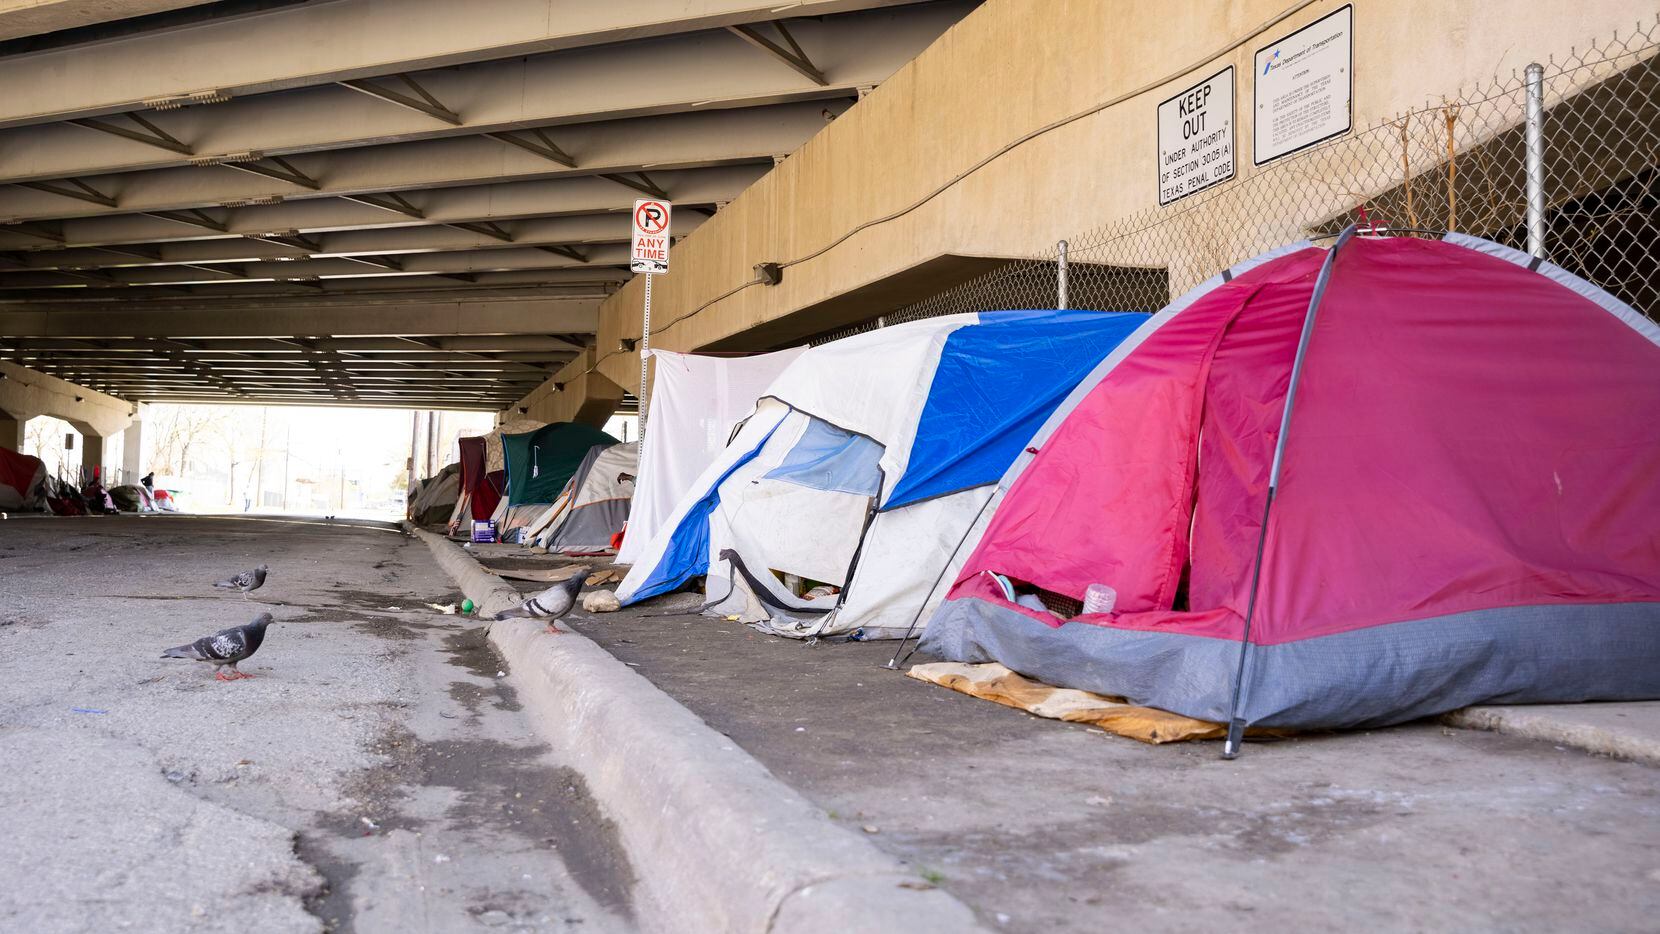 America’s unsheltered homeless population rose by 20.5%, despite a policy aimed at increased...